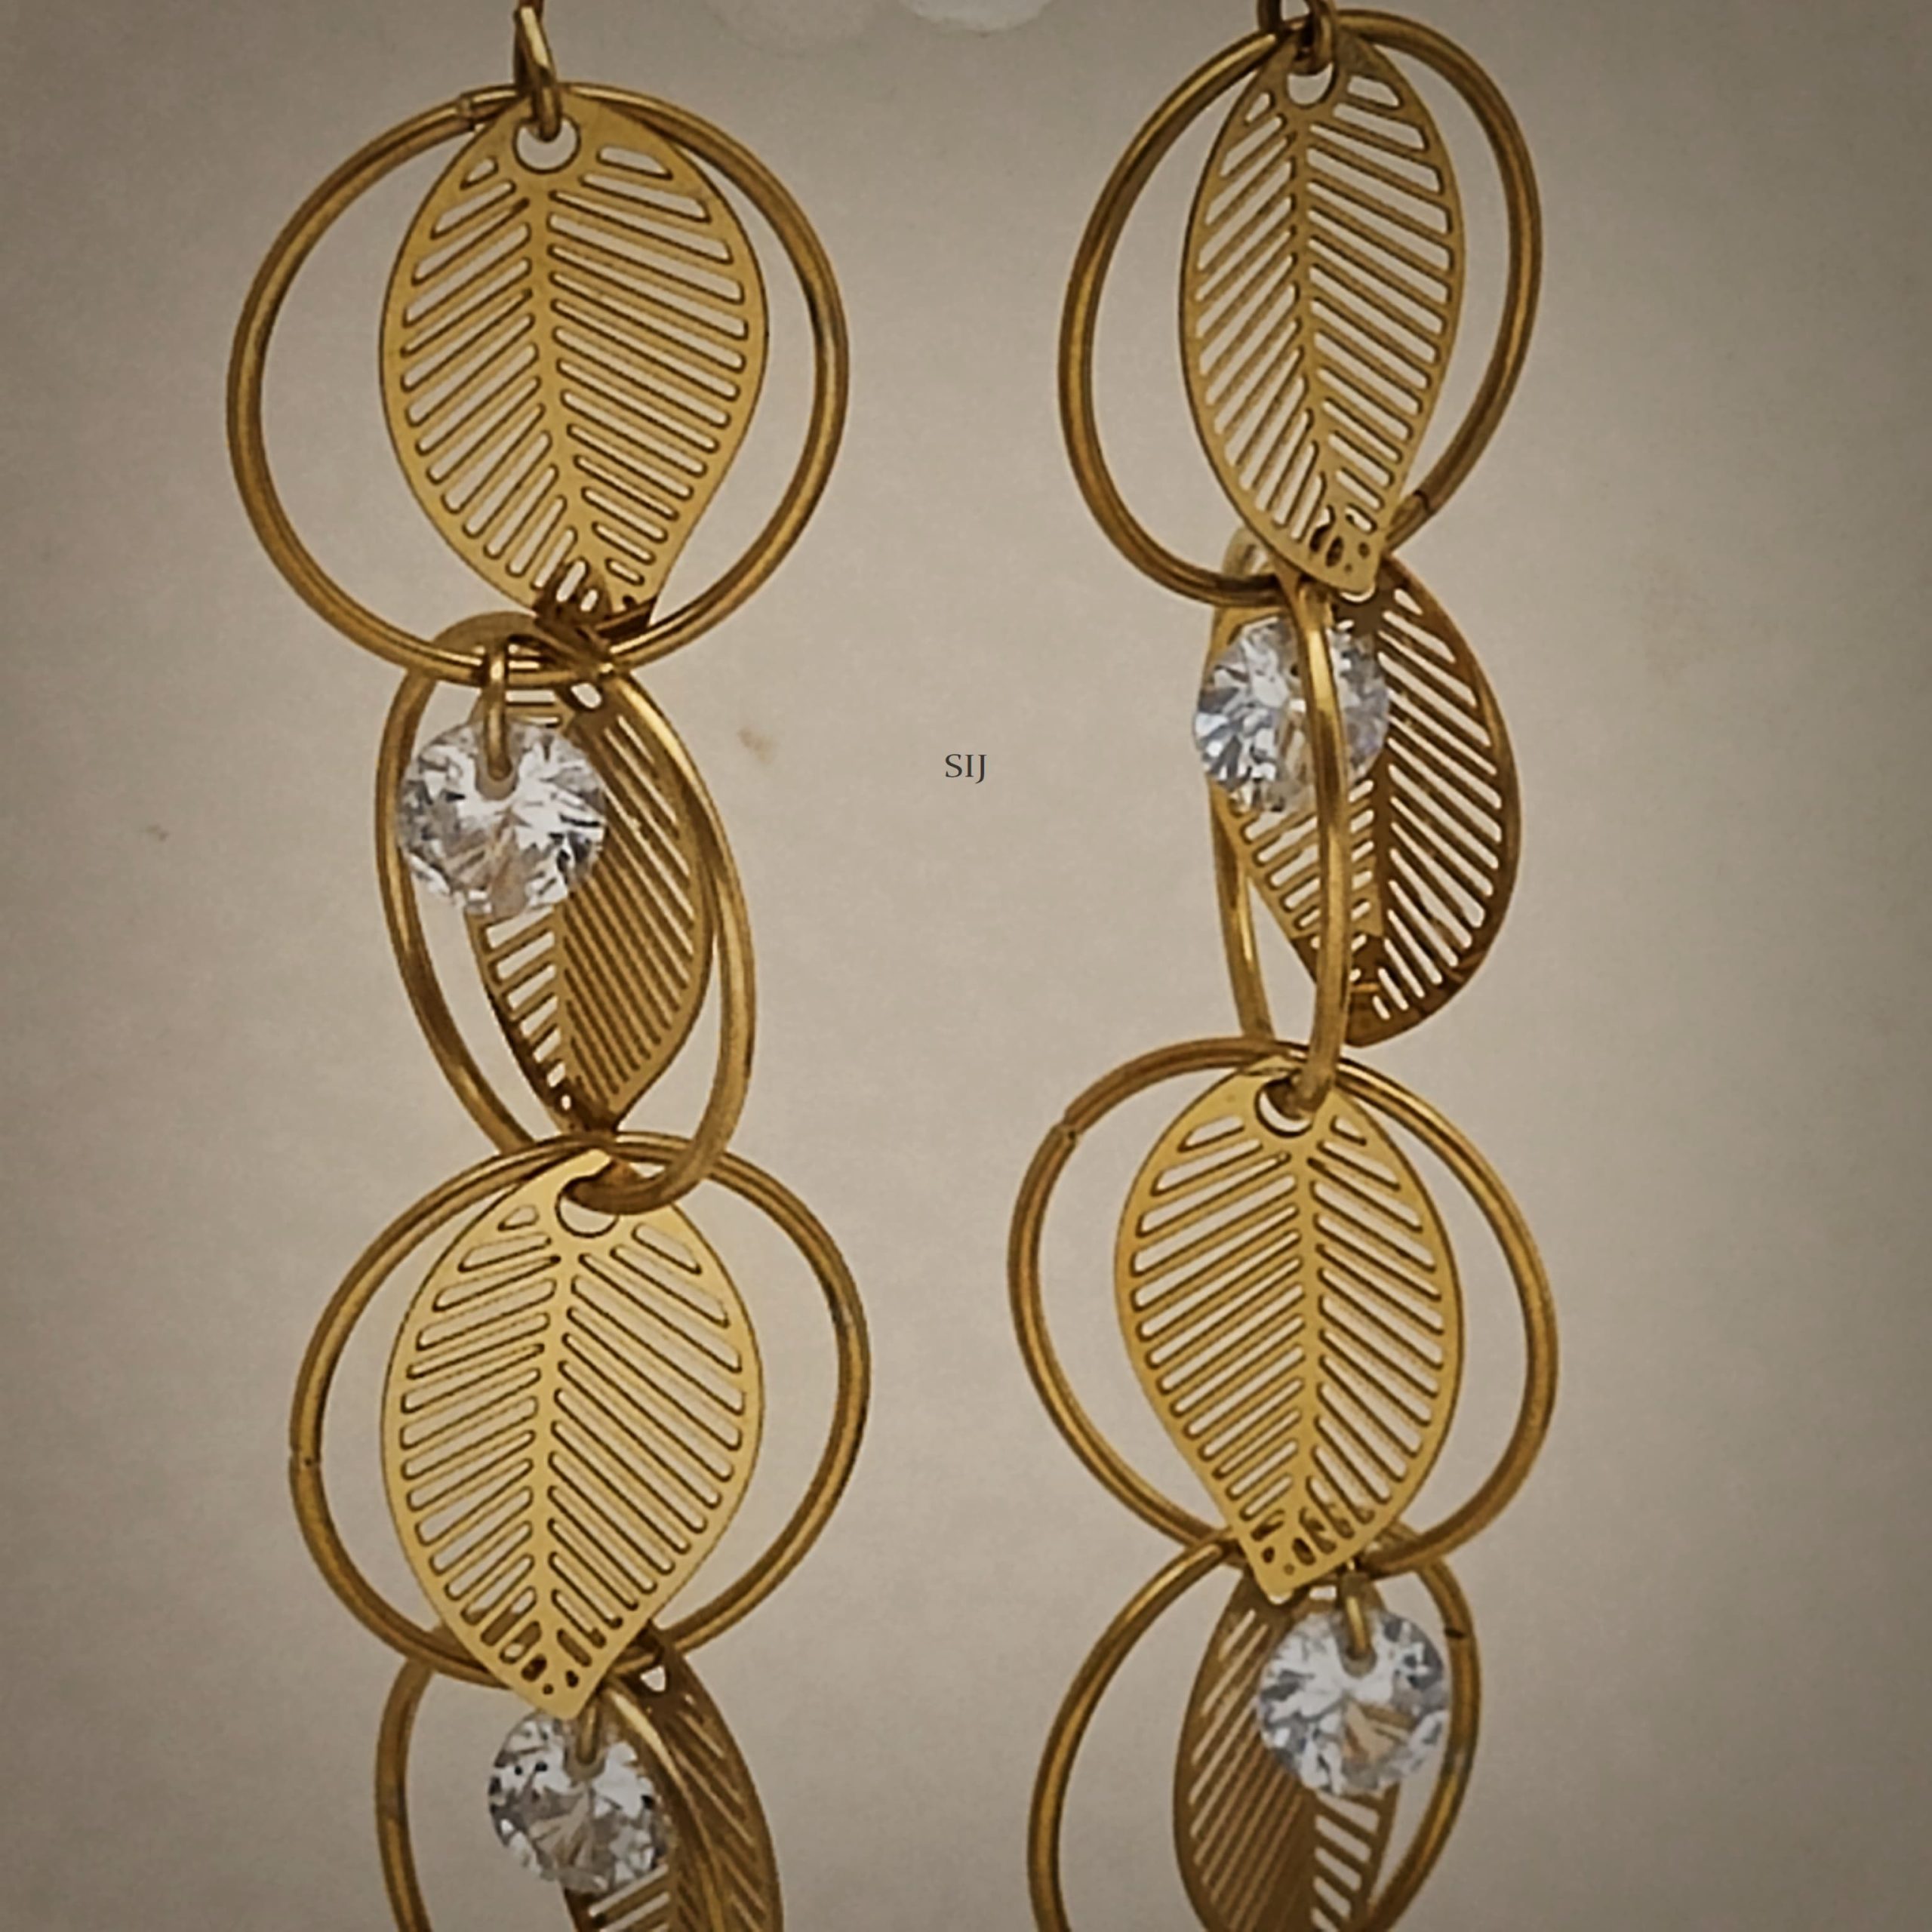 Gold Plated Circular Dangler Earrings with Leaf Design